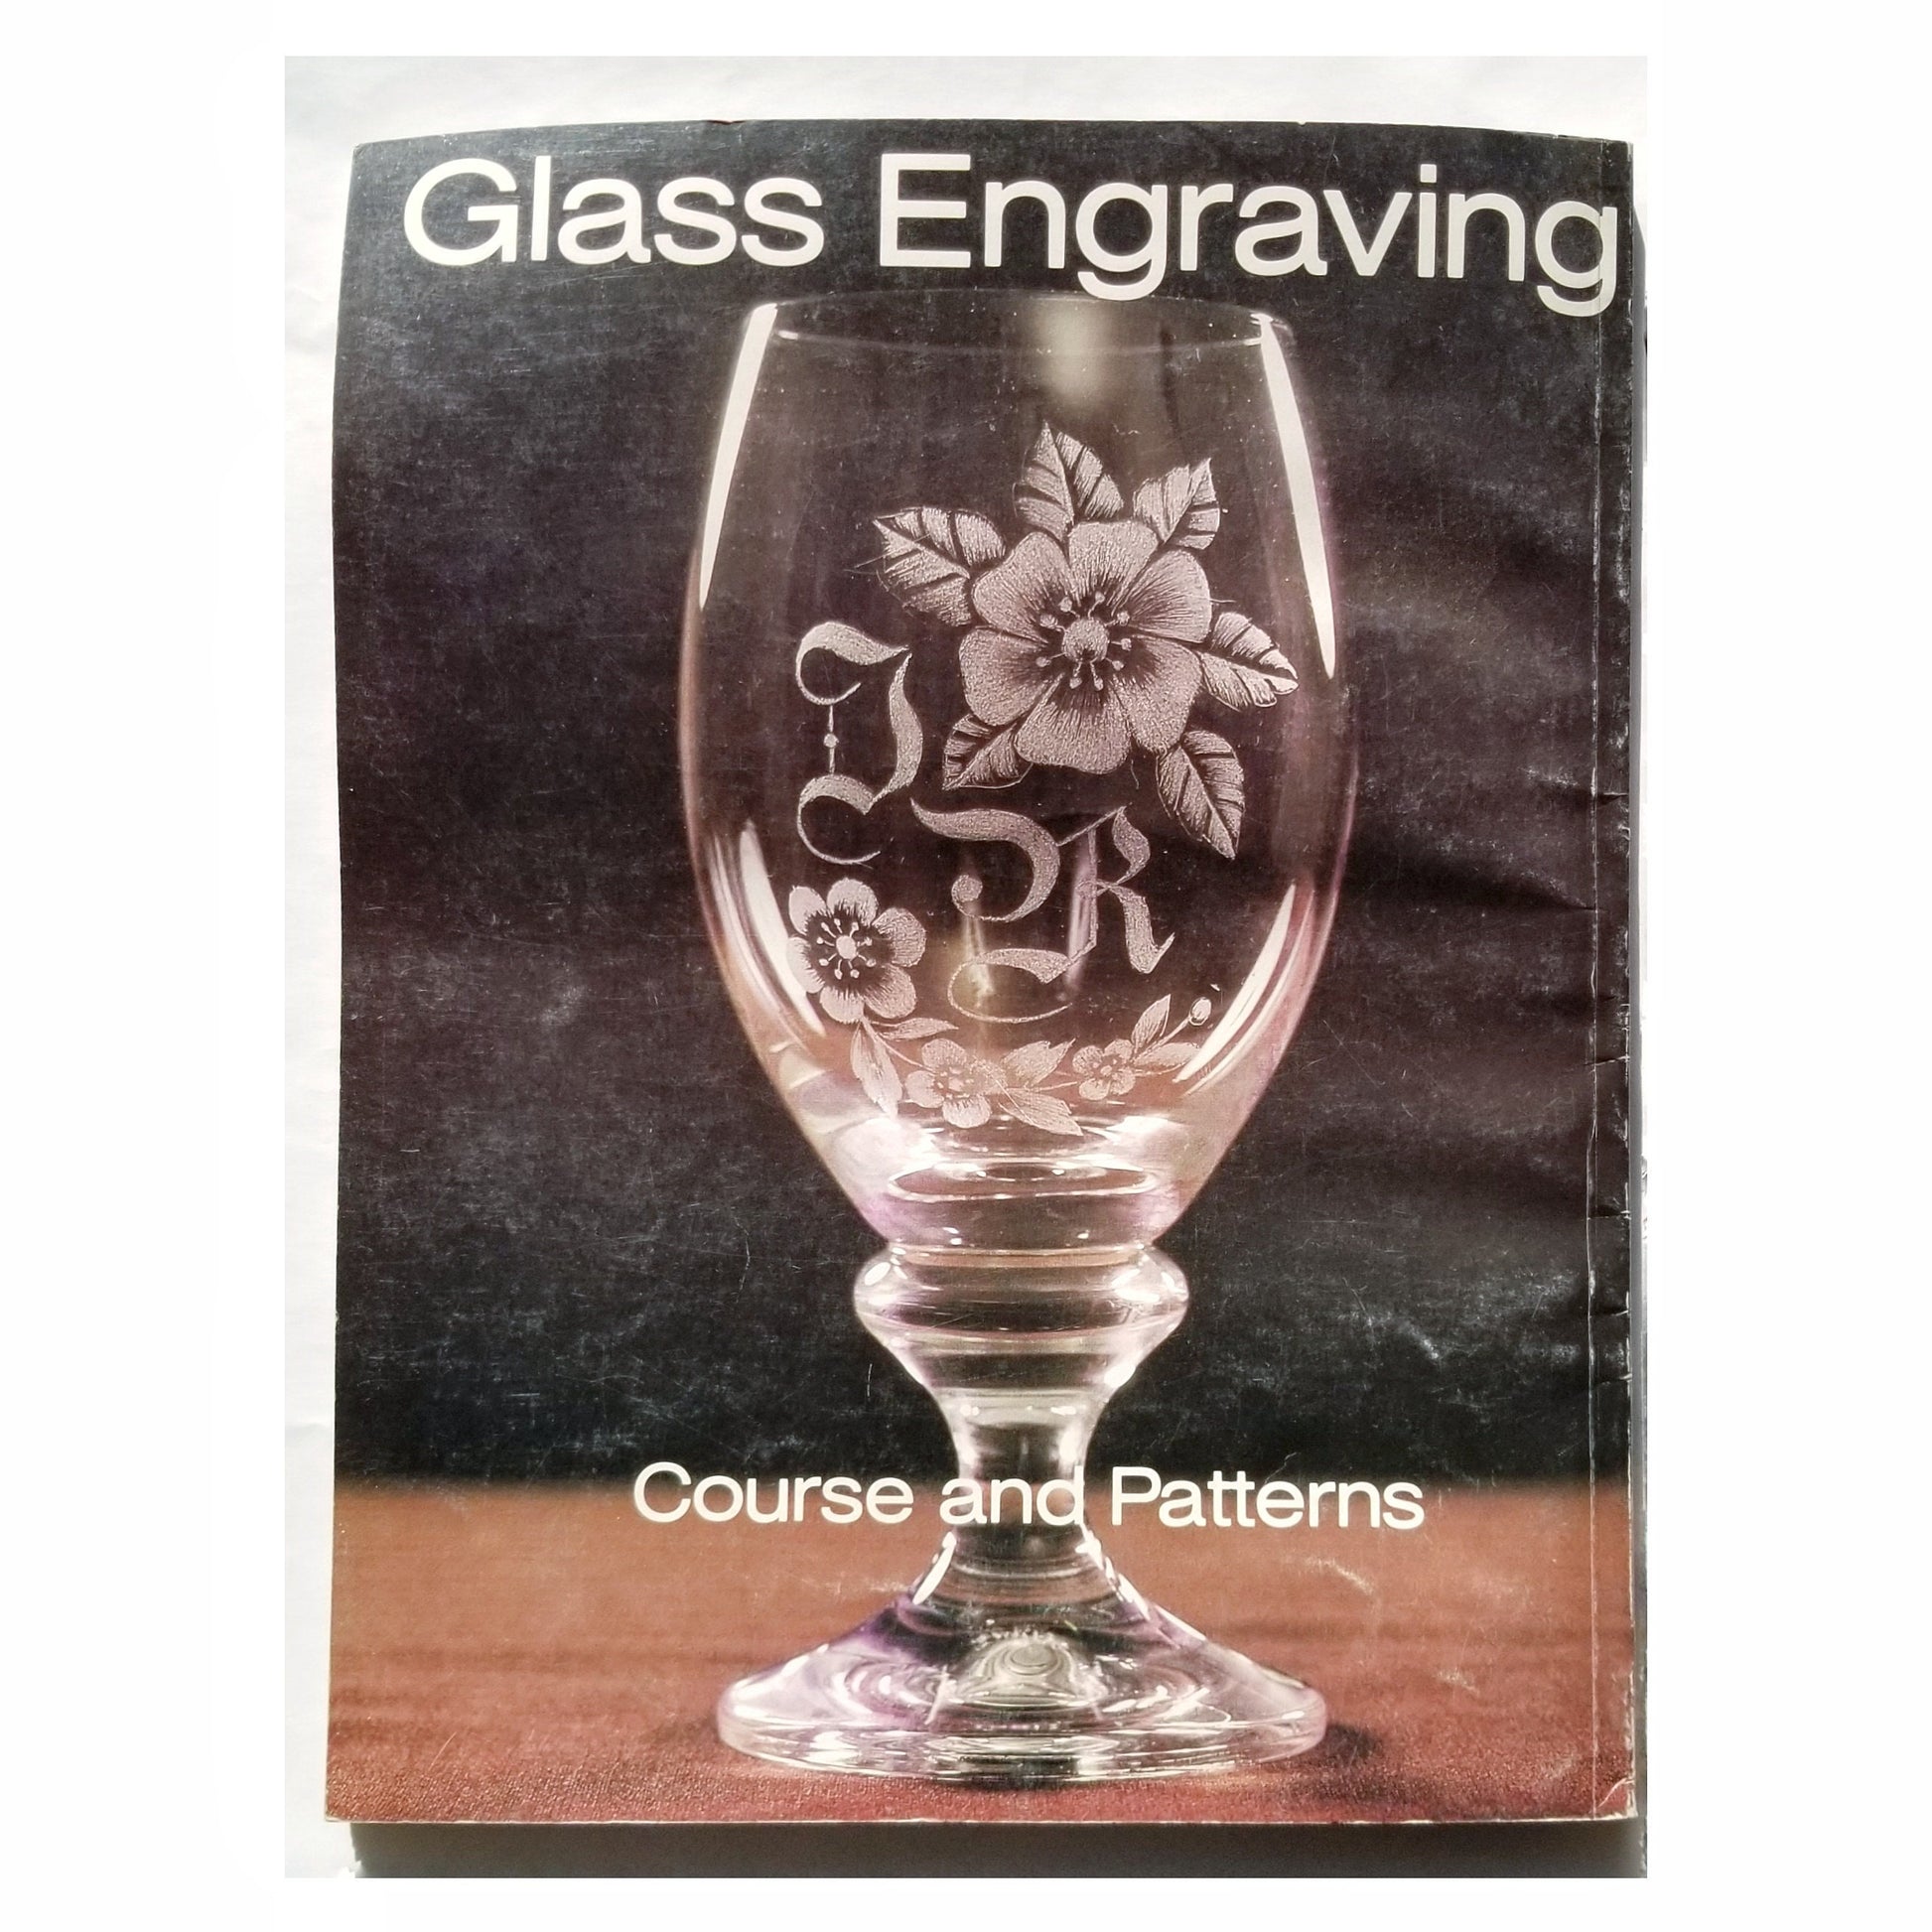 Etched & Sandblasted Glass Patterns. 2 Instruction Books with 1 Magazine. Diy Stemware etching. Used, Vintage, Fair Condition.